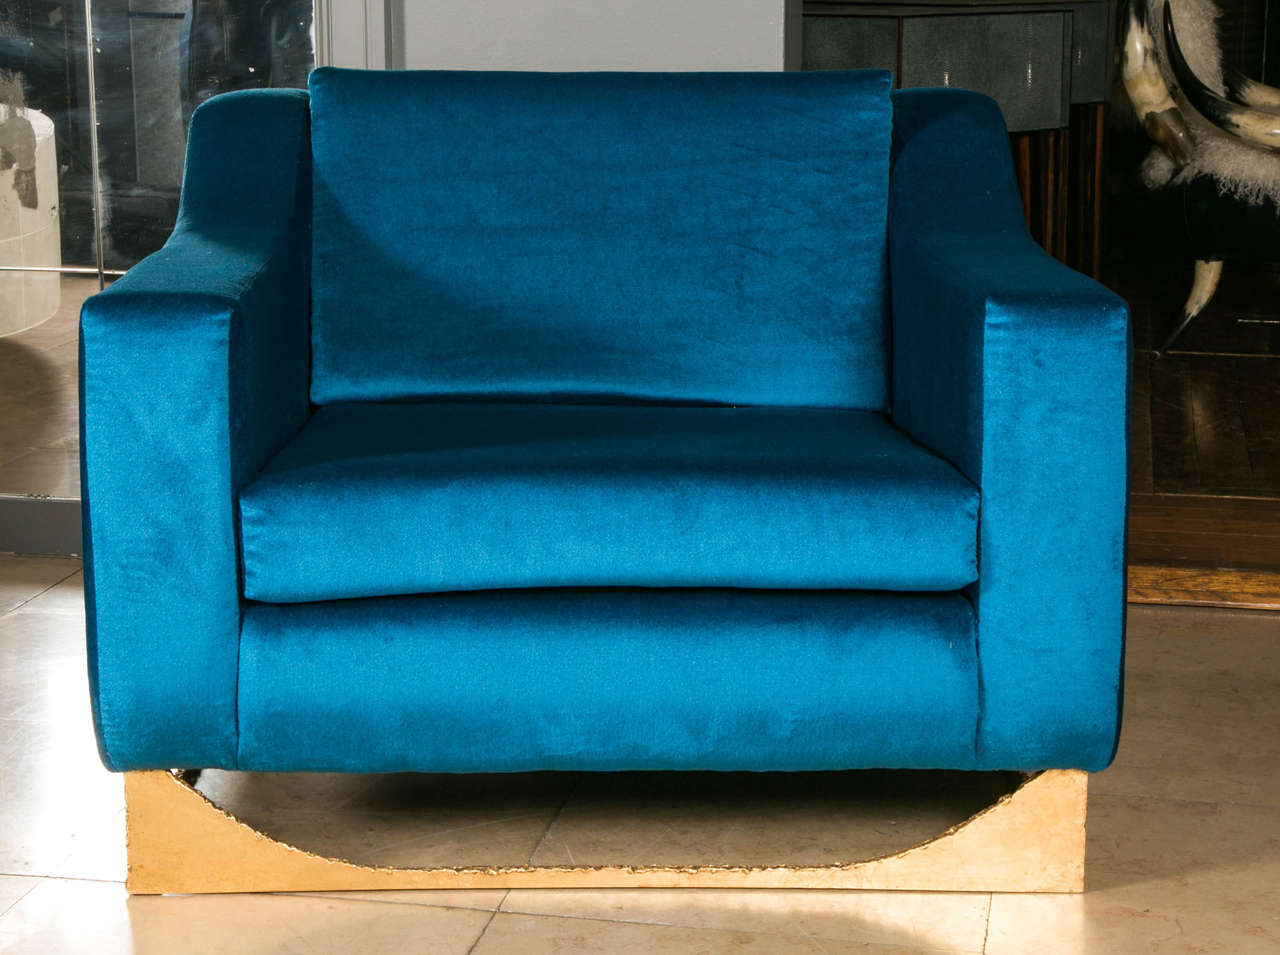 Pair of armchairs with a gilt bronze basement, upholstered with blue fabric.